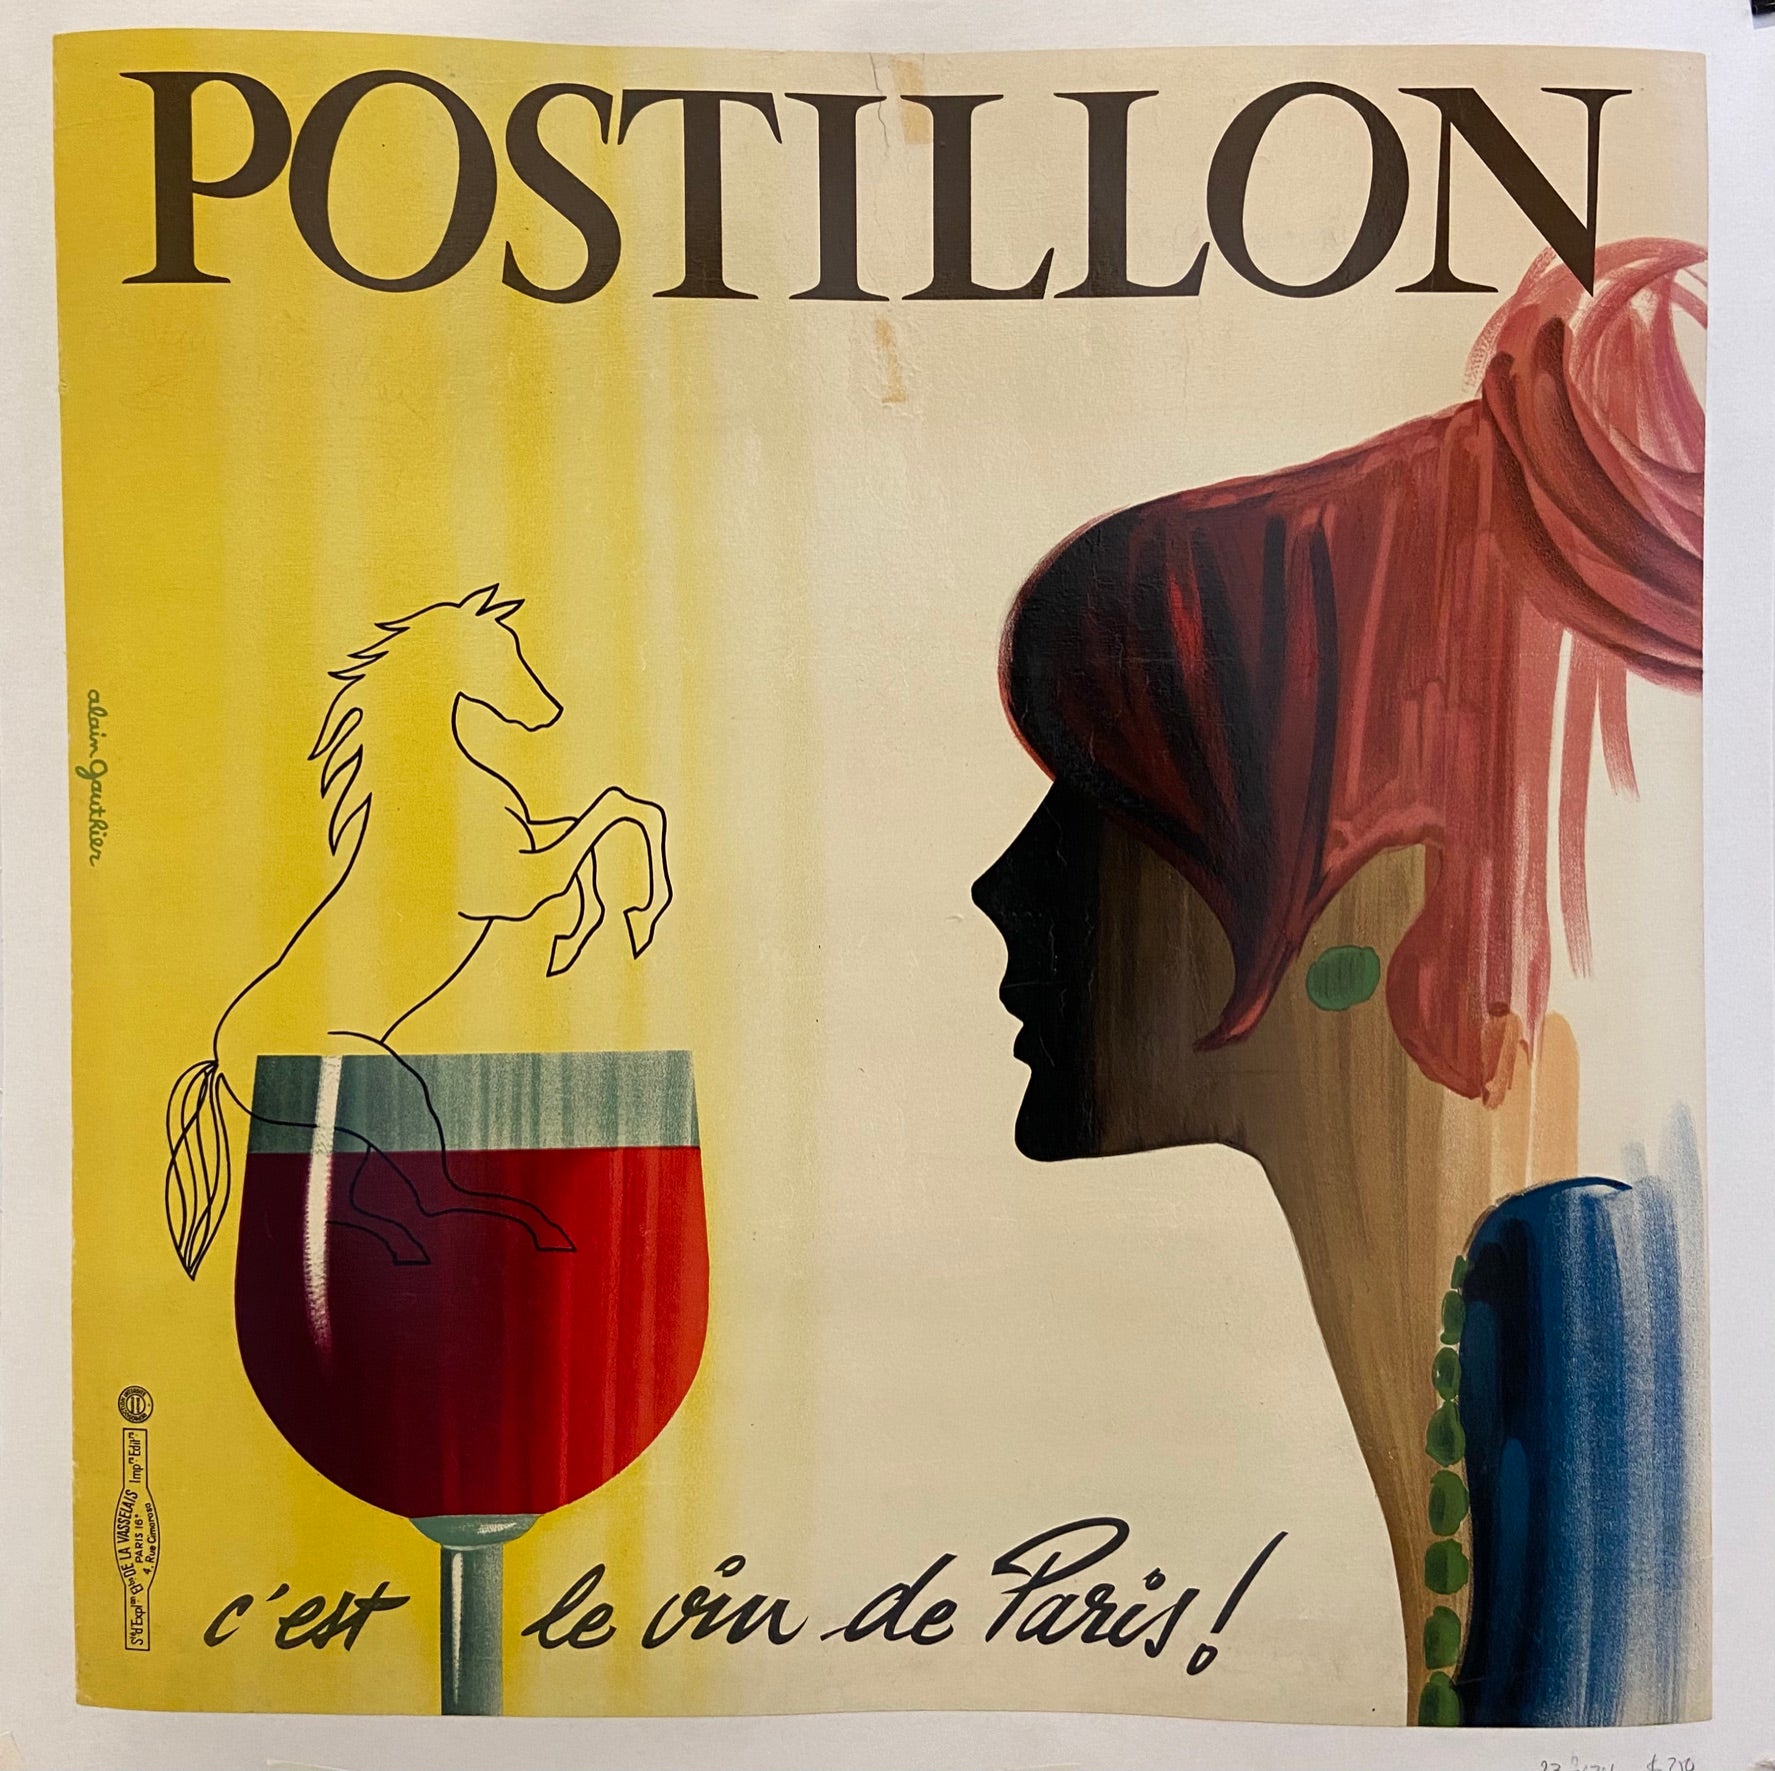 Poster for Postillon wine featuring a woman in profile sitting before a glass of red wine